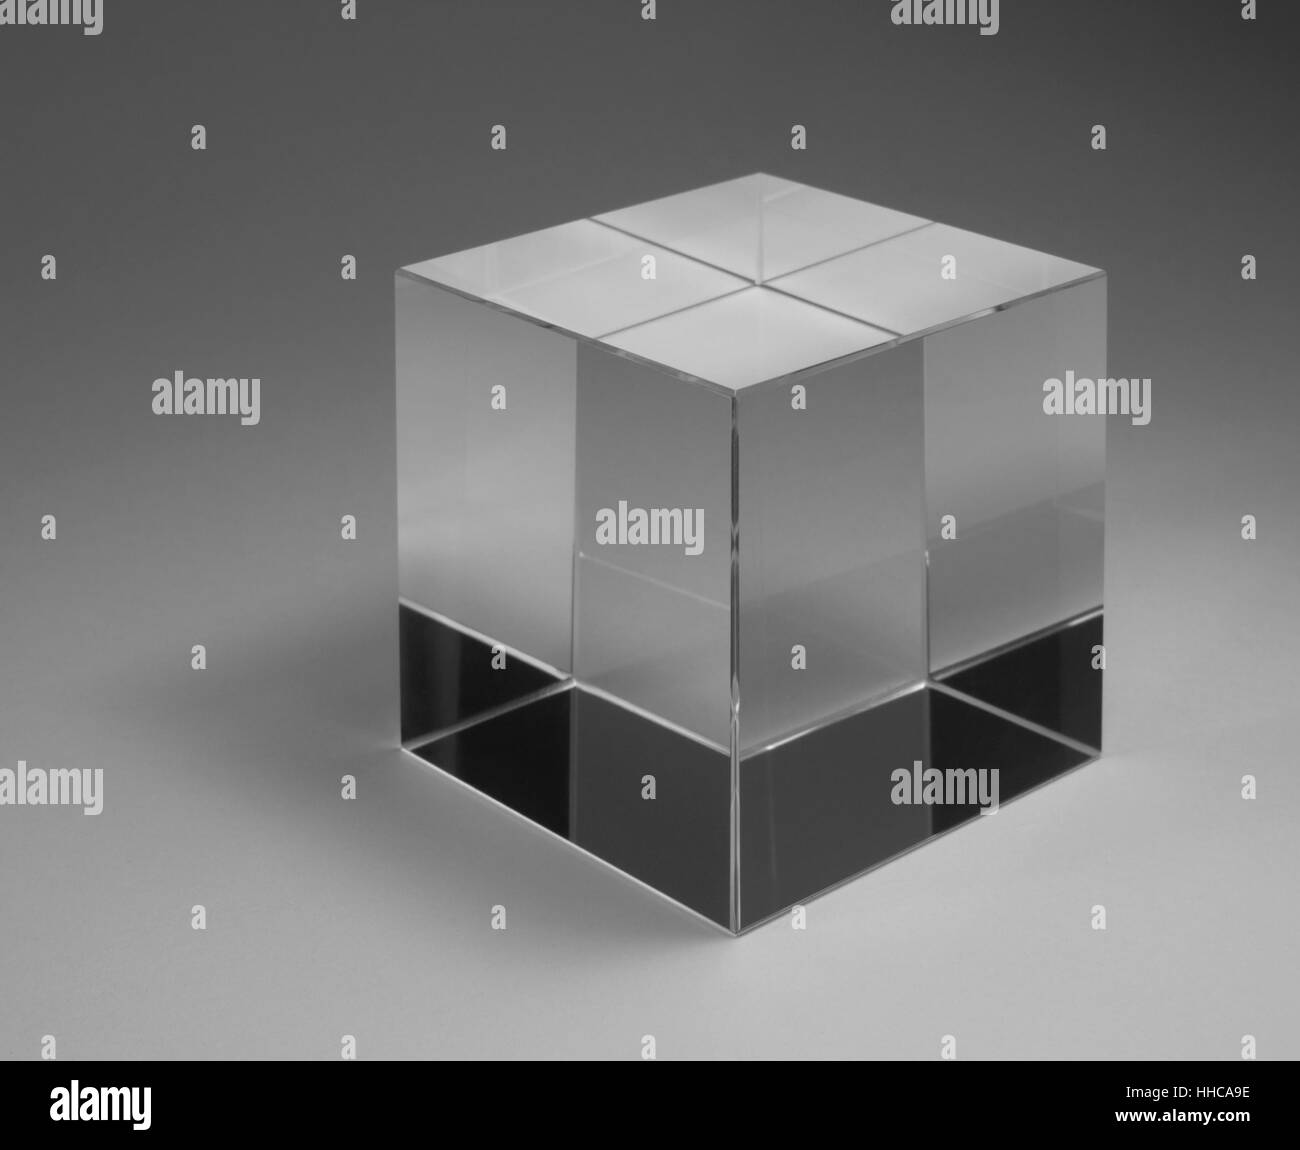 banner, quadratic, glassy, cubes, science, research, reflection, mirroring, Stock Photo